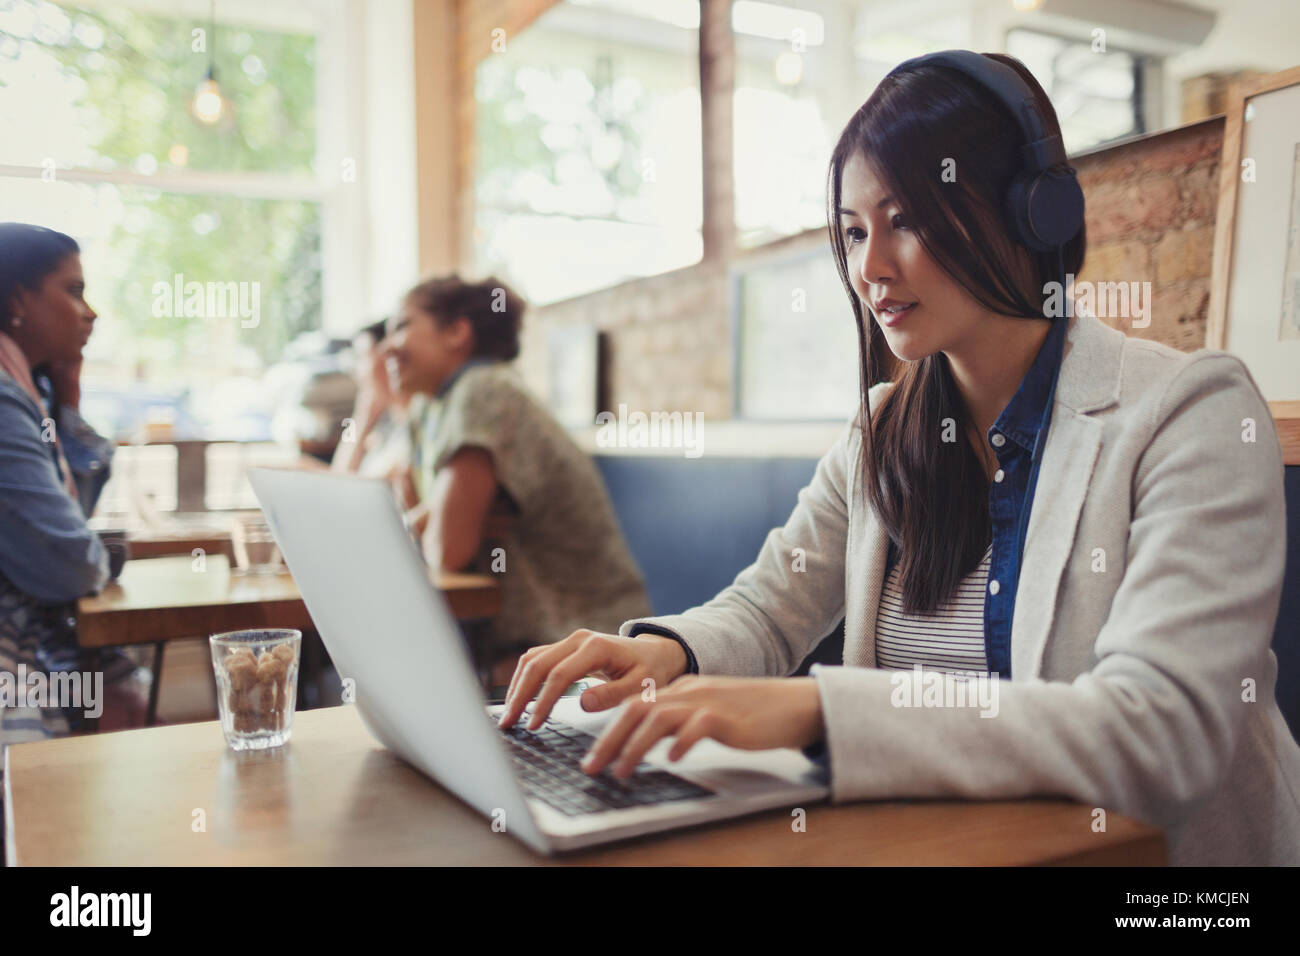 Young woman with headphones using laptop at cafe table Stock Photo